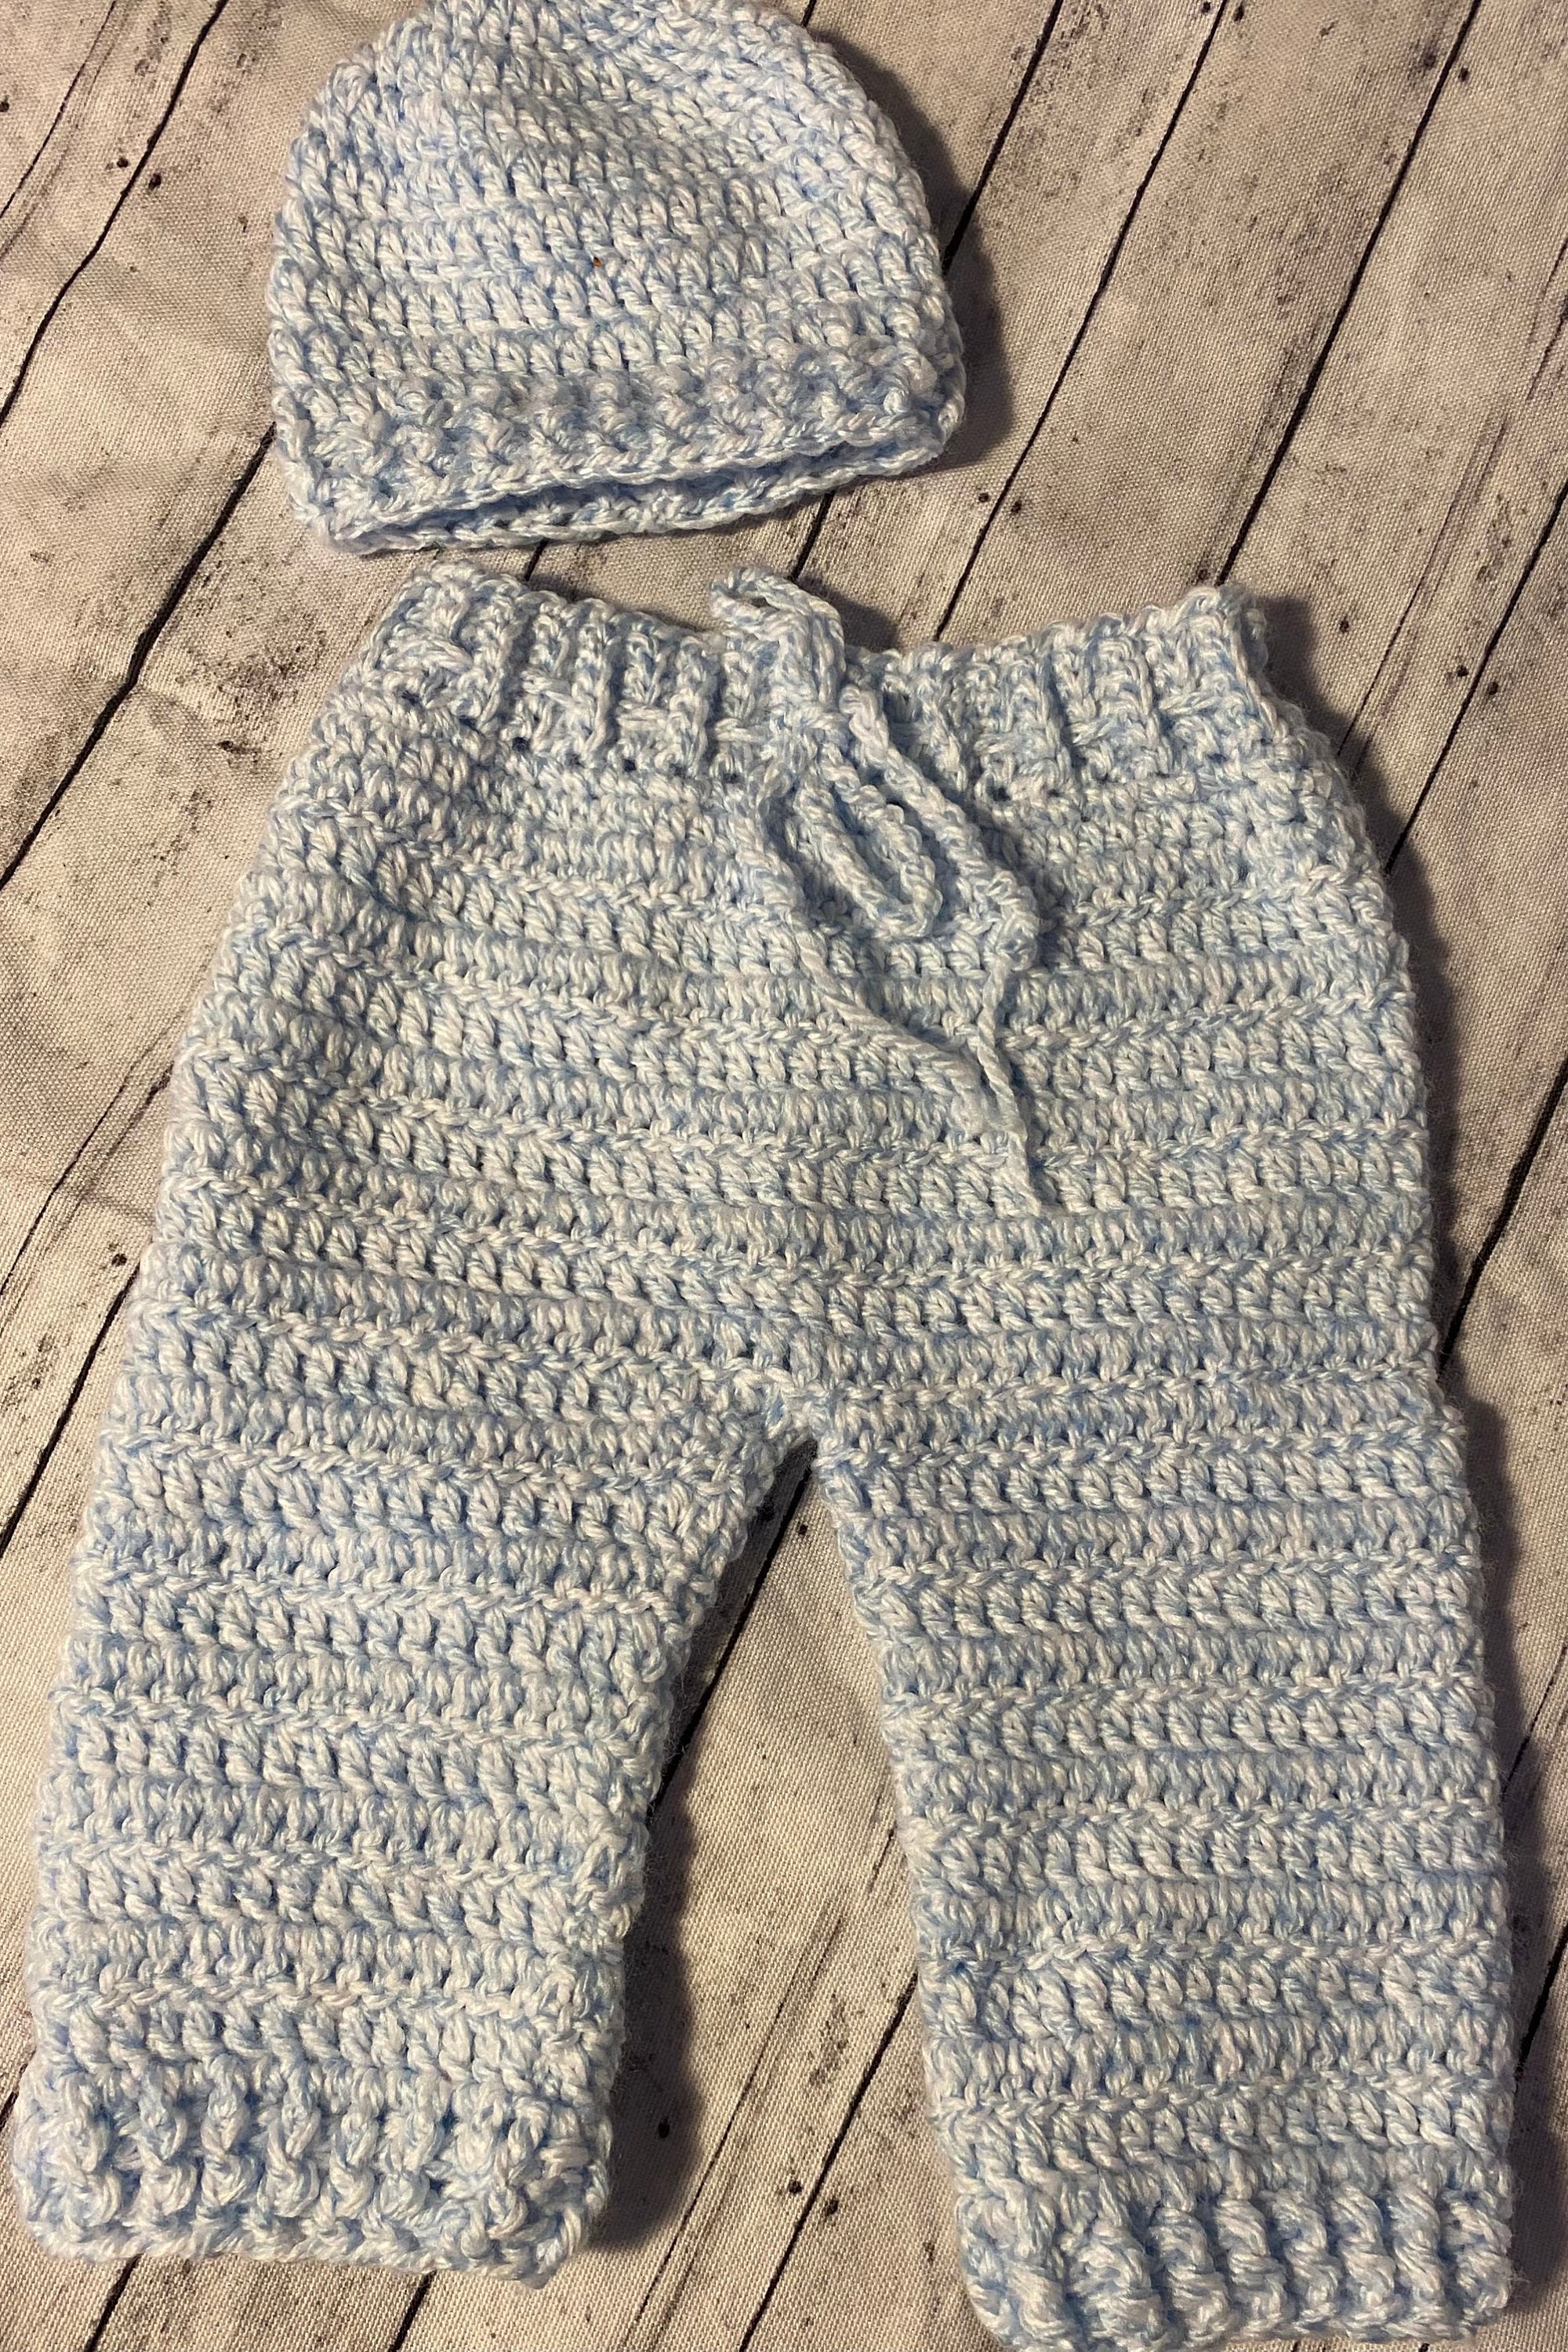 Crochet Boy Pants and Hat Outfit